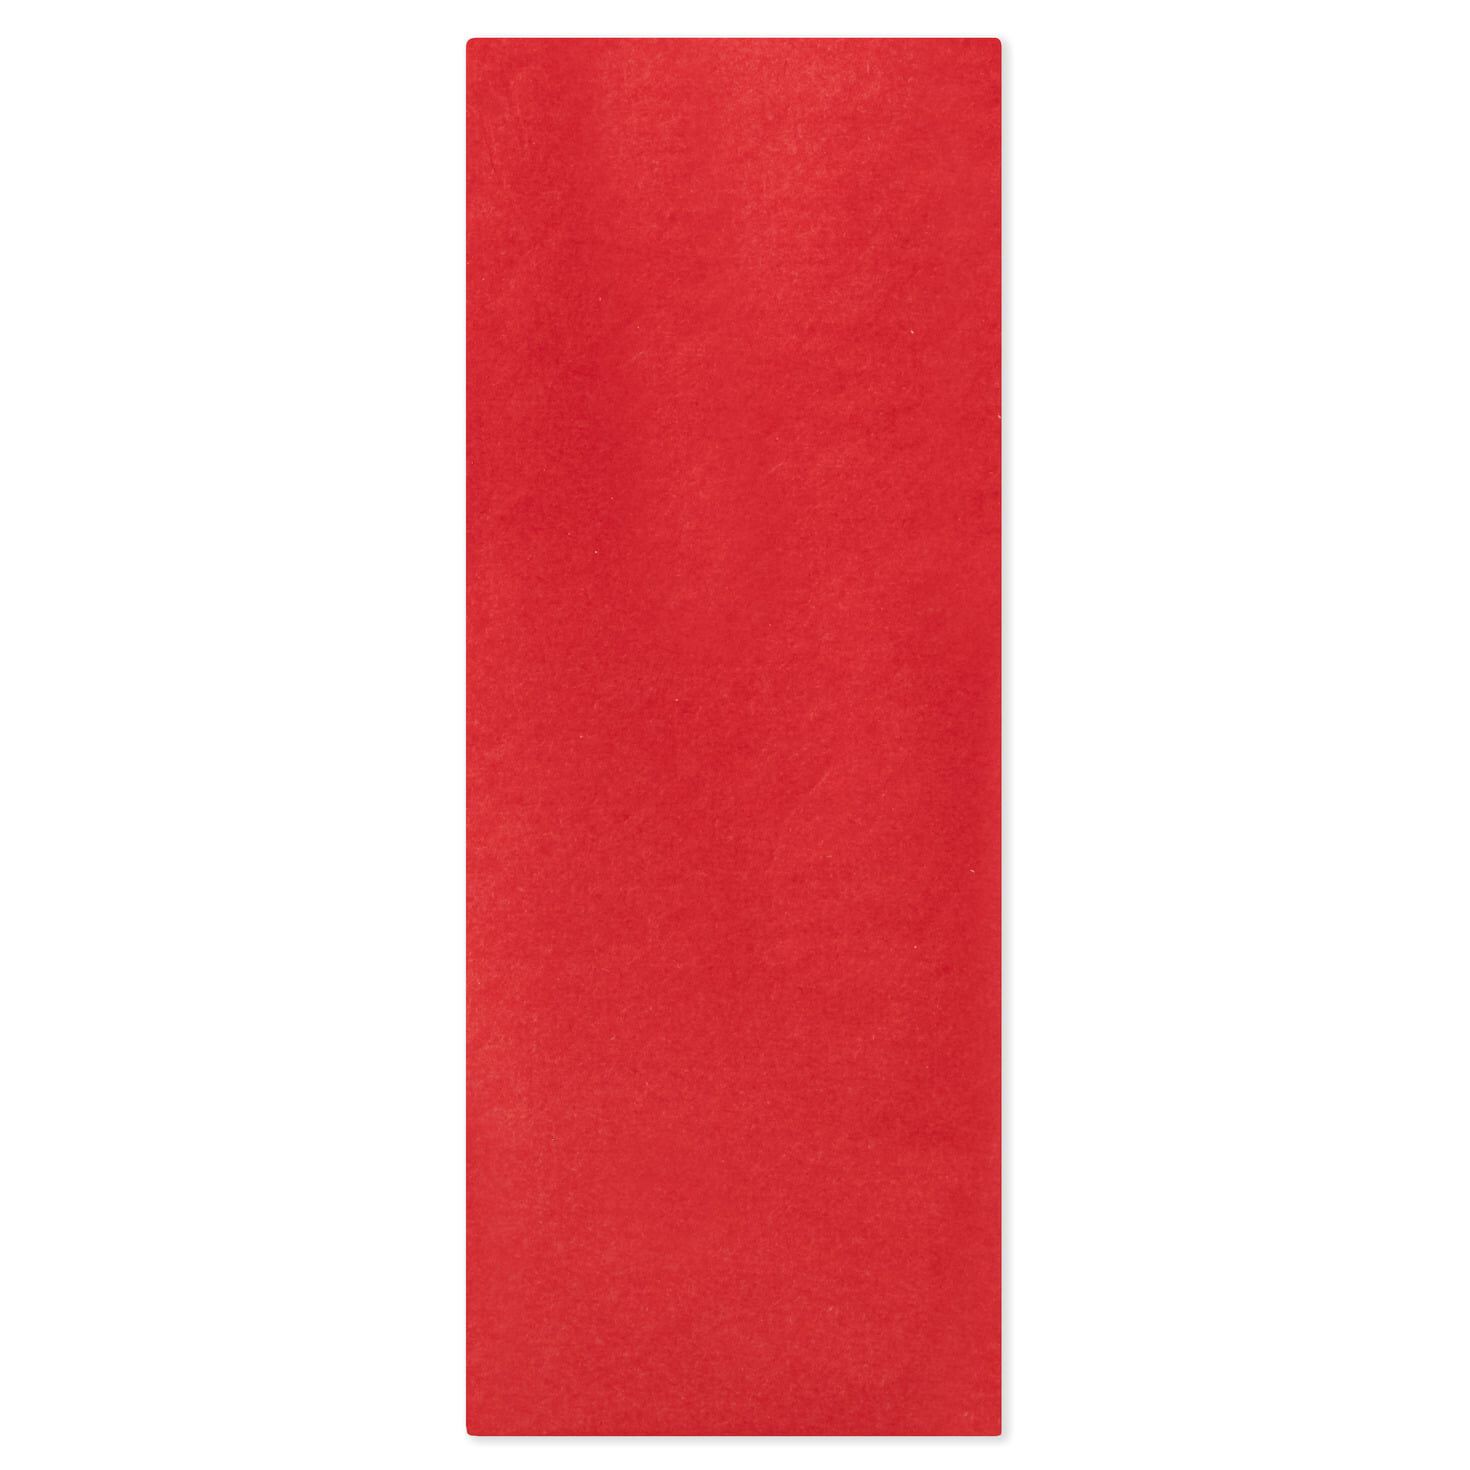 Hallmark Tissue Paper (Red and Green, 100 Sheets) 